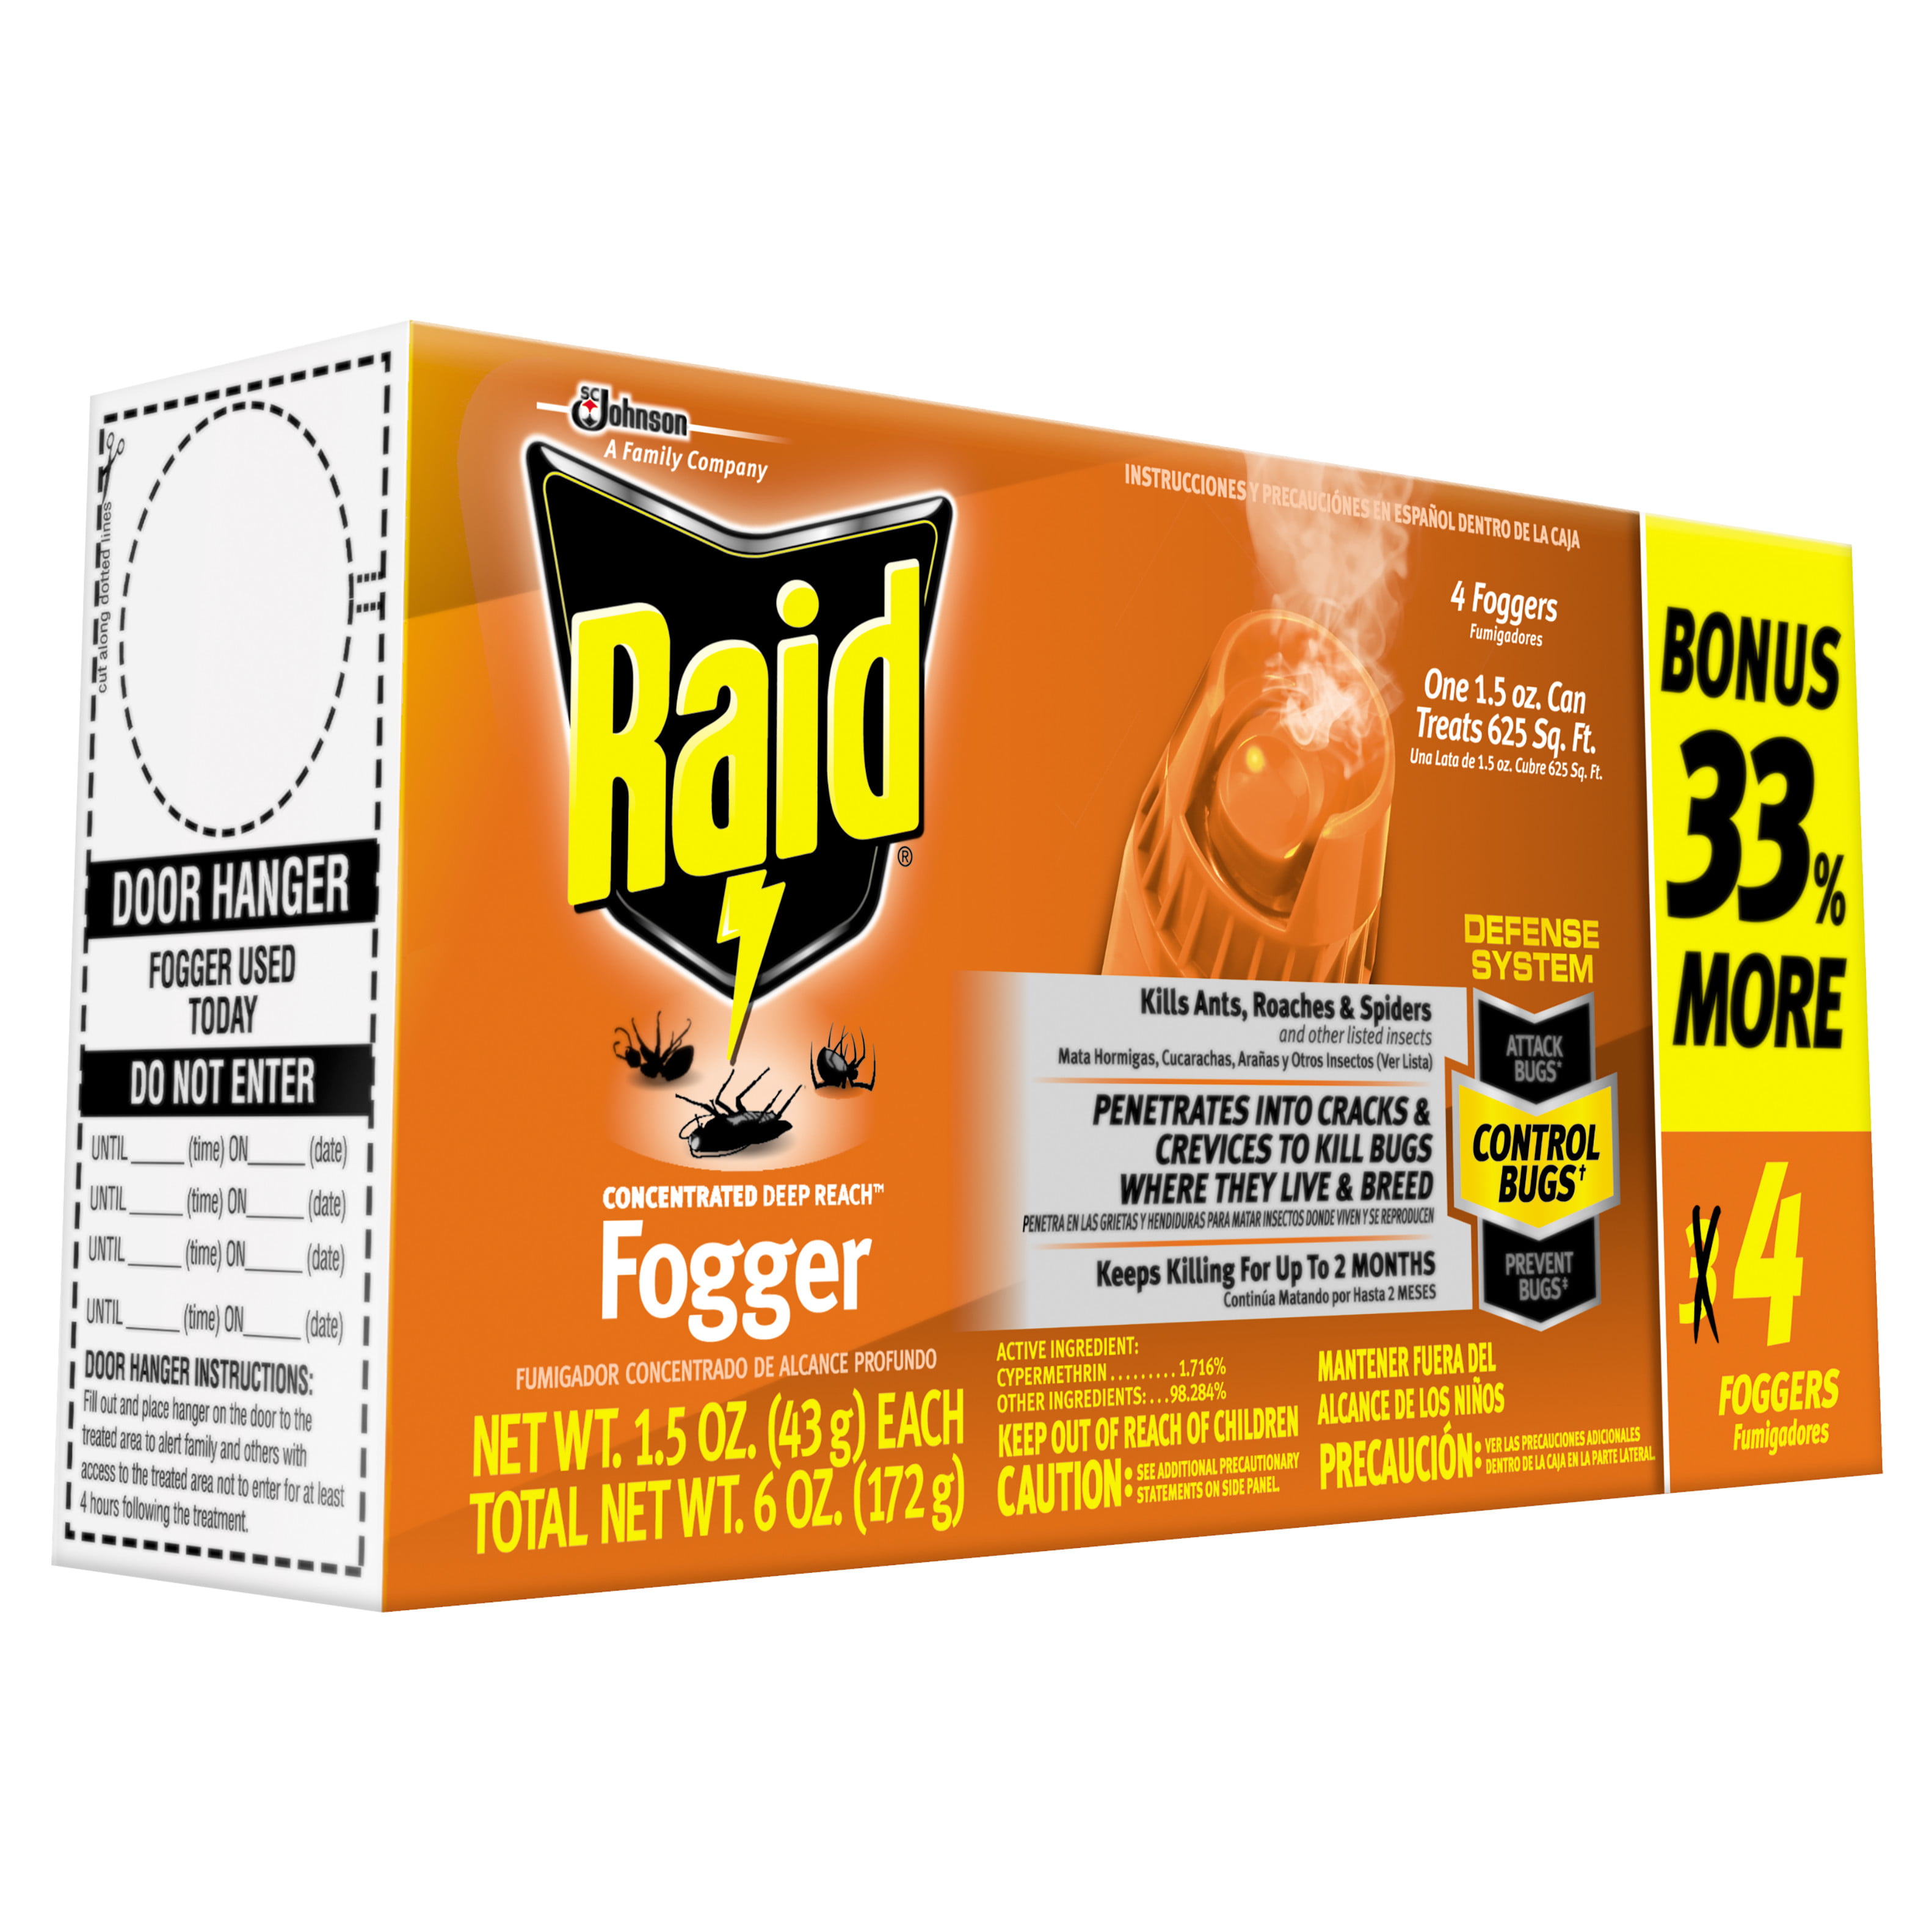 What is better, Raid Fogger or Raid Fumigator, or can they be used at the same time?